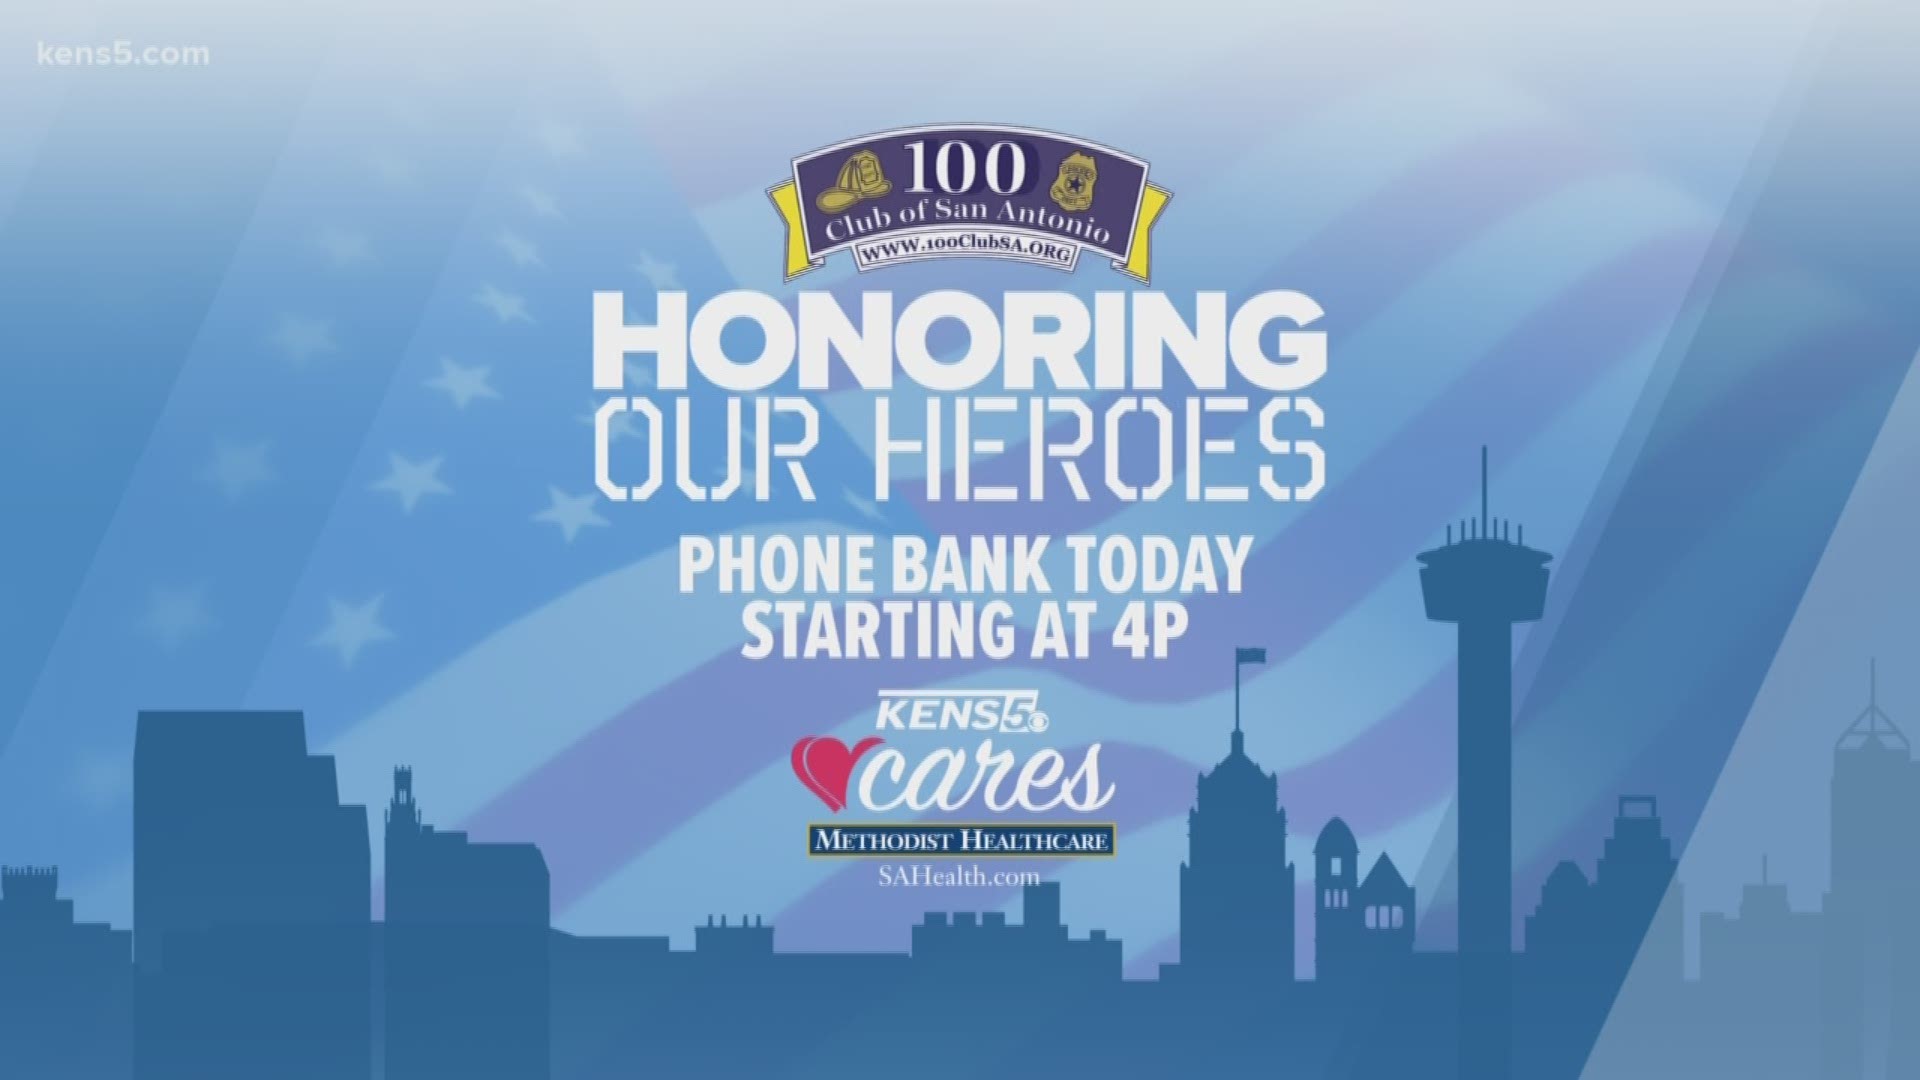 KENS 5 is hosting a phone bank where you can make donations to the 100 Club. The organization is a long-time supporter of families of fallen first responders.